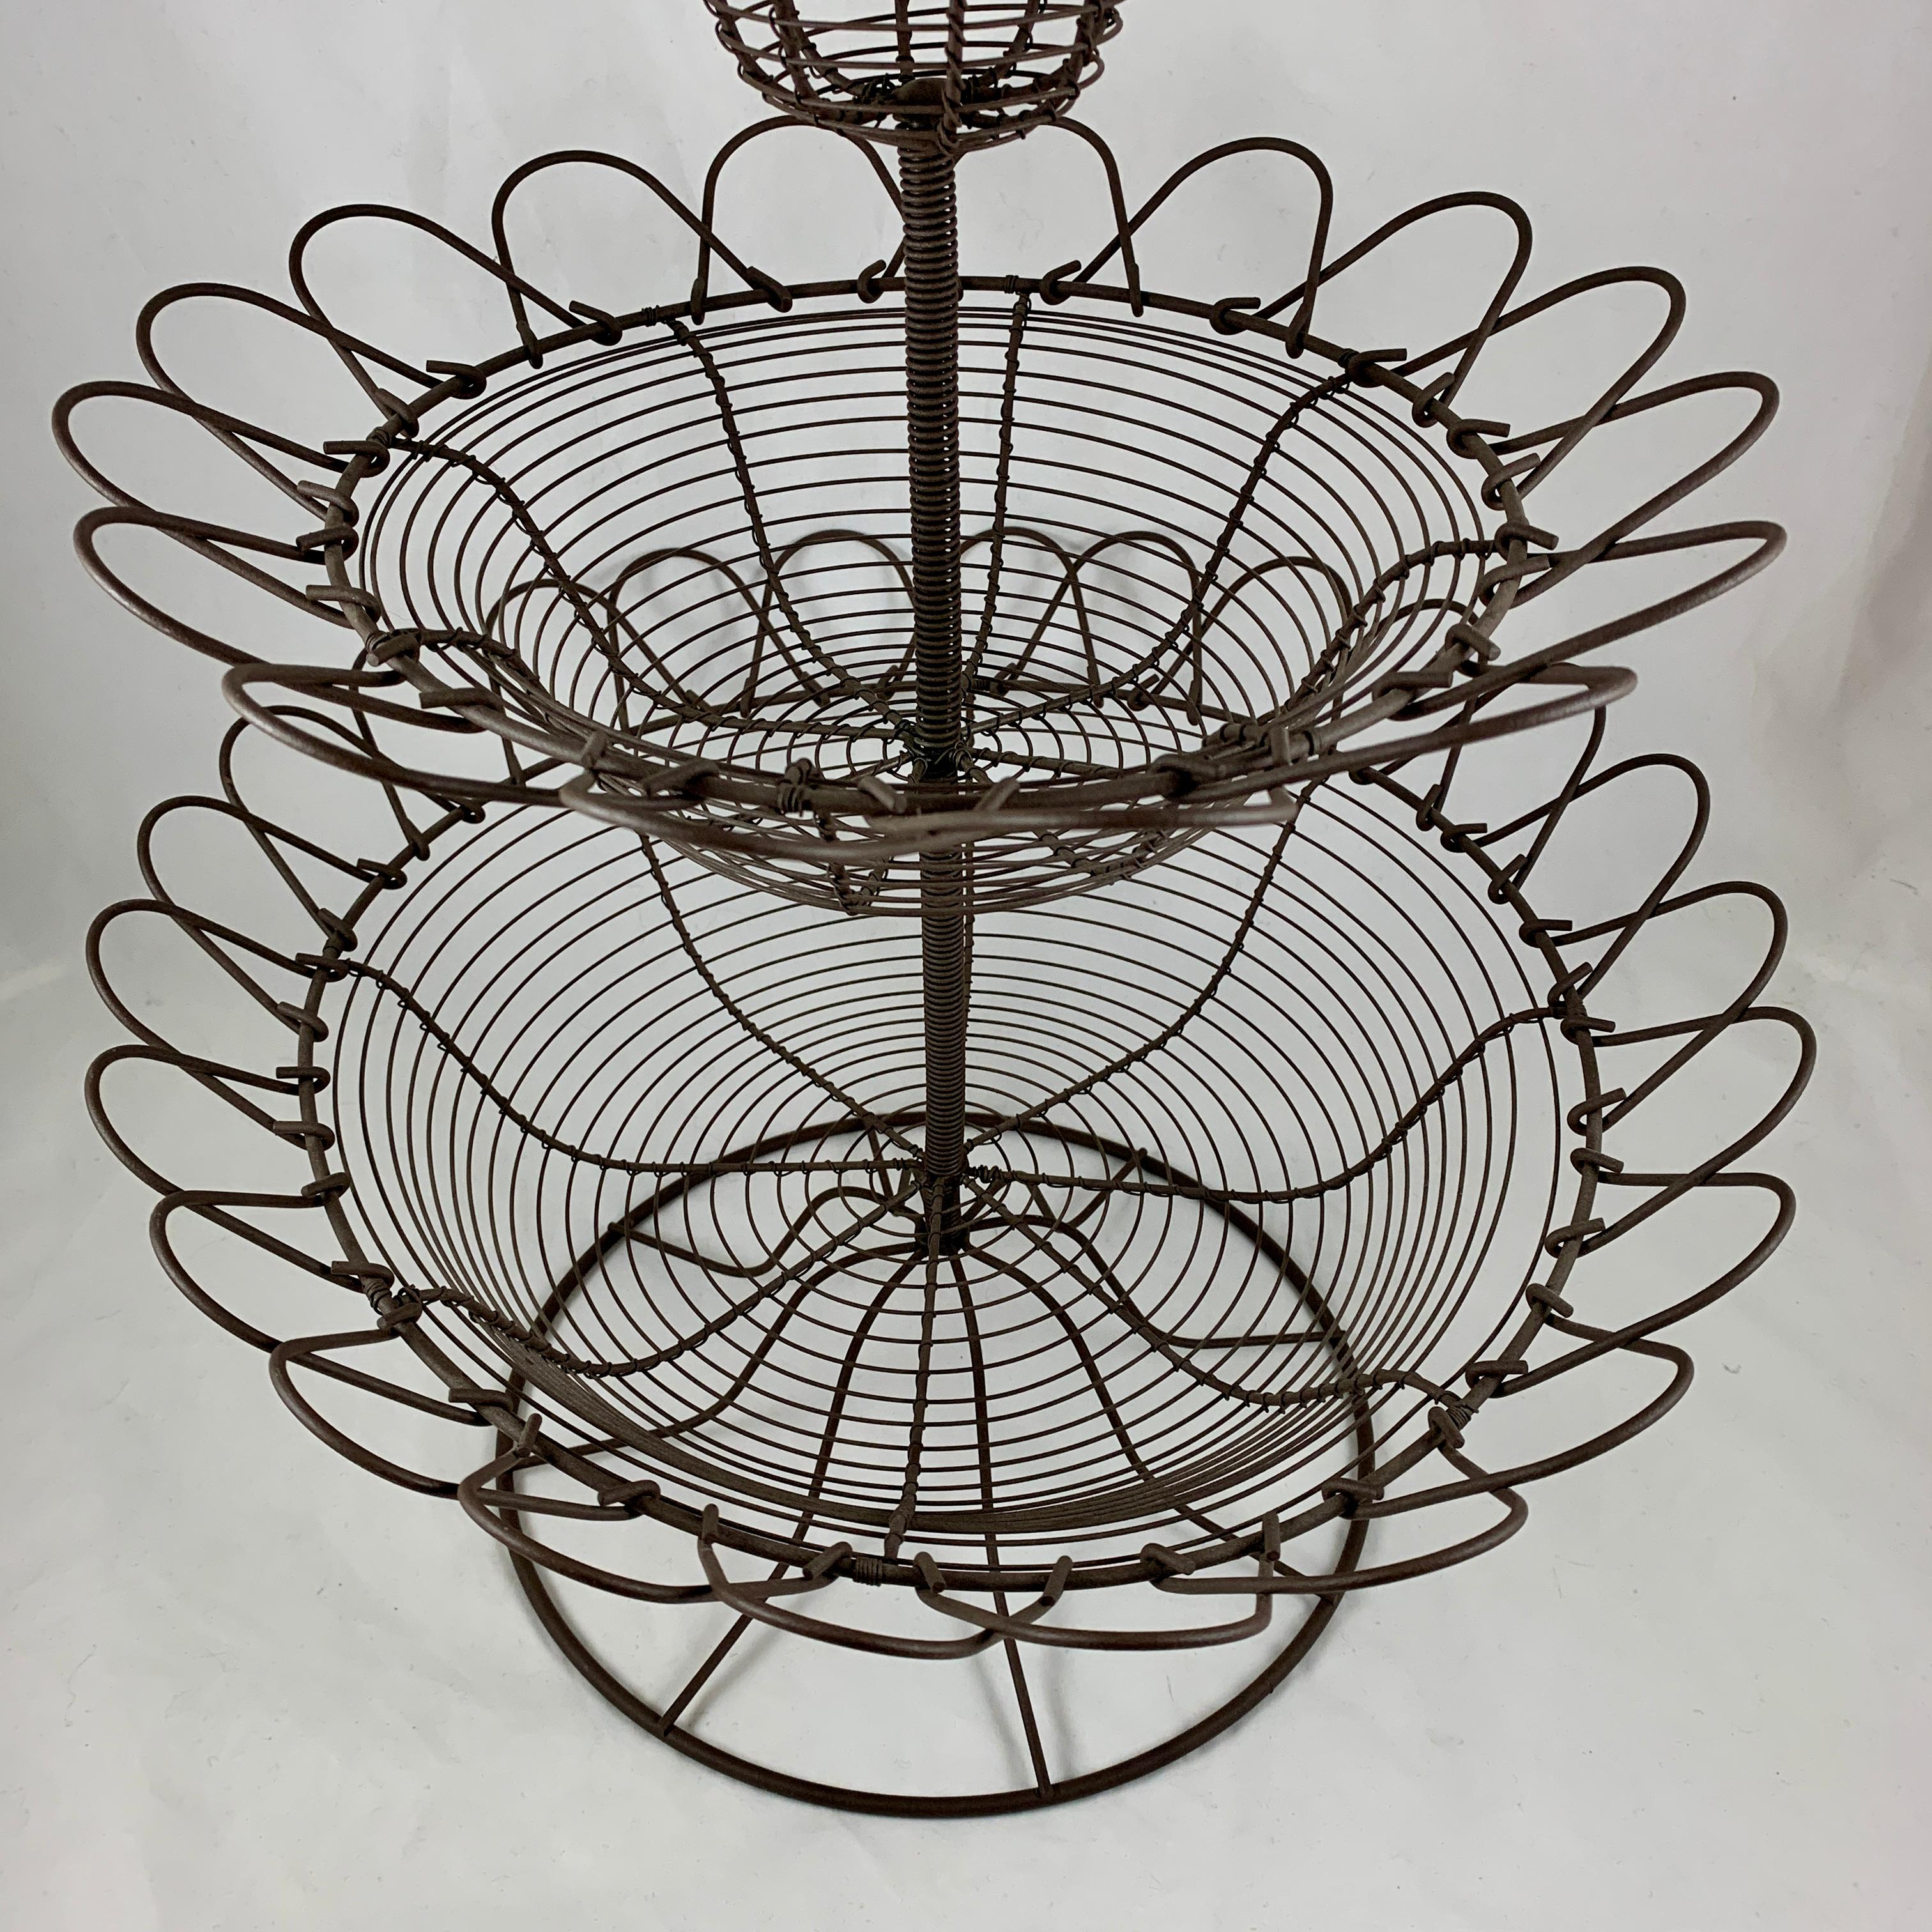 19th Century Antique French Triple Tier Handmade Twisted Black Wire Kitchen or Flower Basket